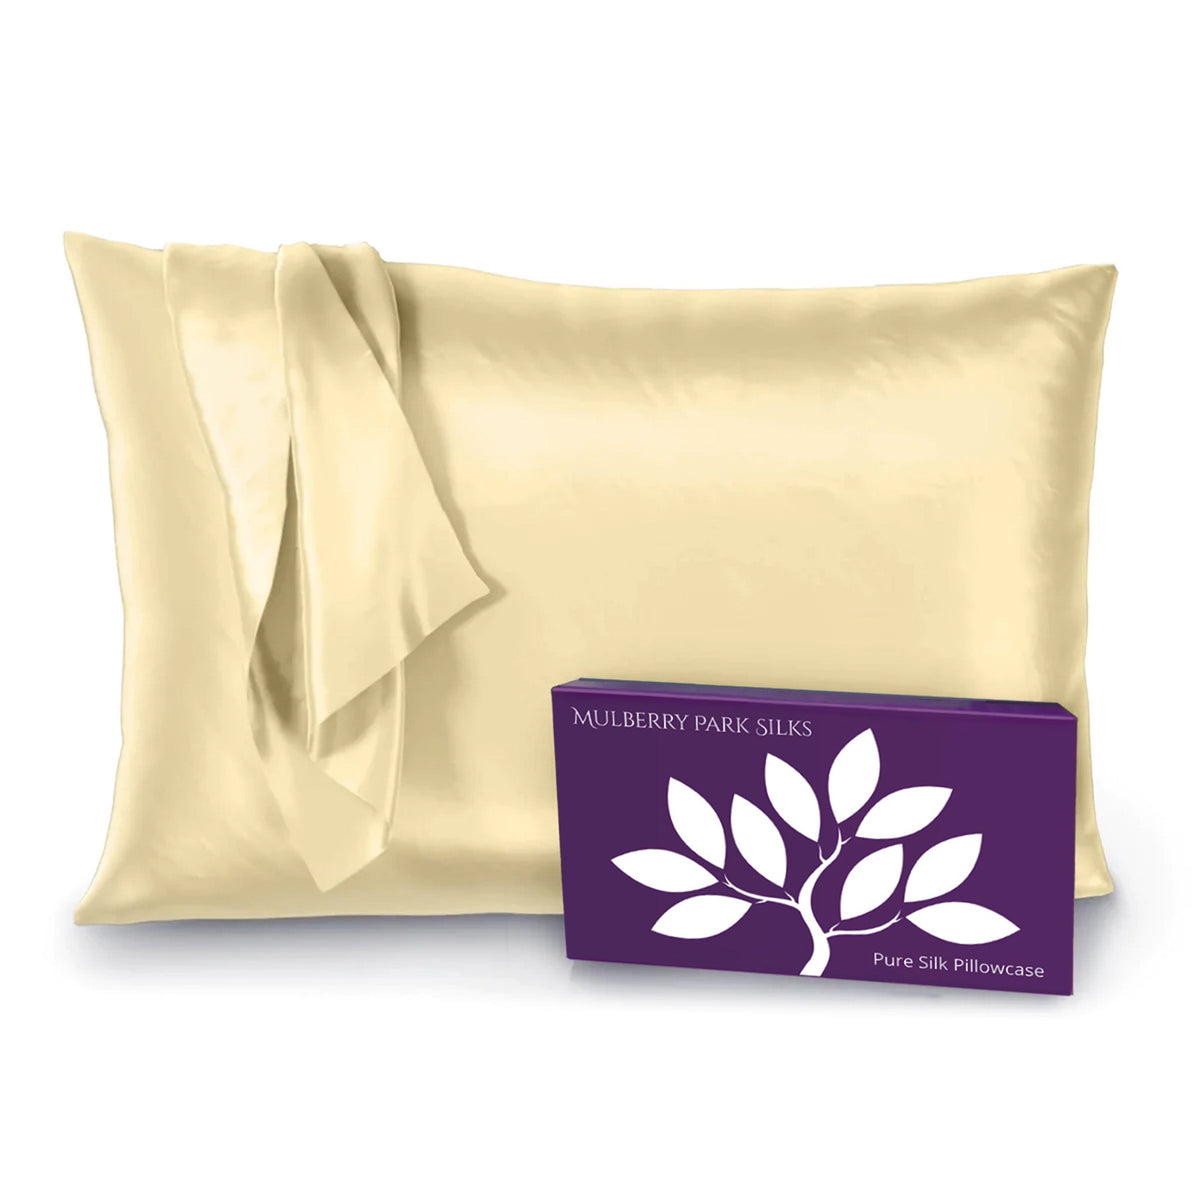 22 Momme Silk Pillowcases - Discontinued Color Sale